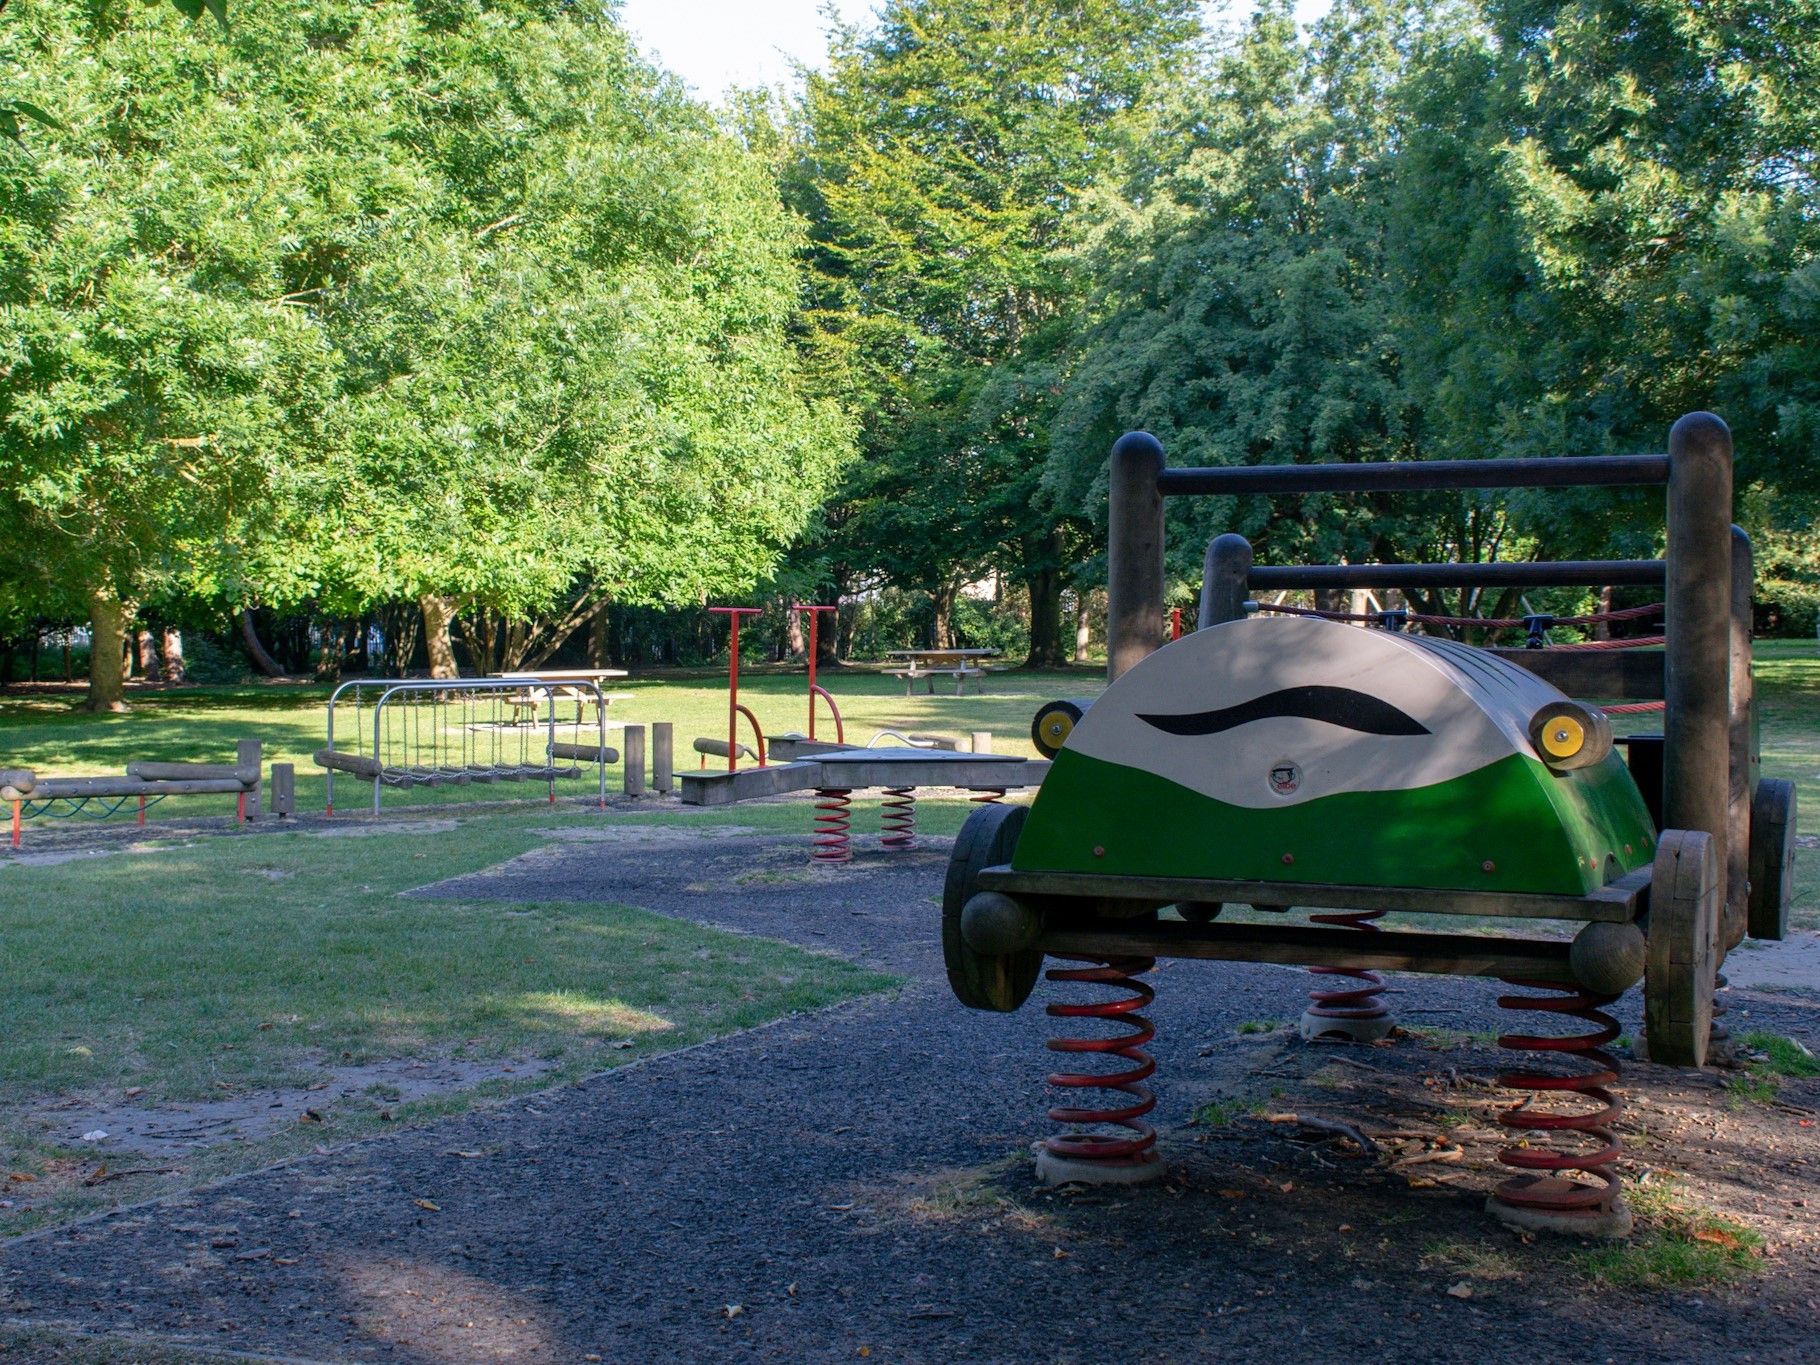 Safari jeep and springy play equipment outside the fort at Cobtree Manor Park